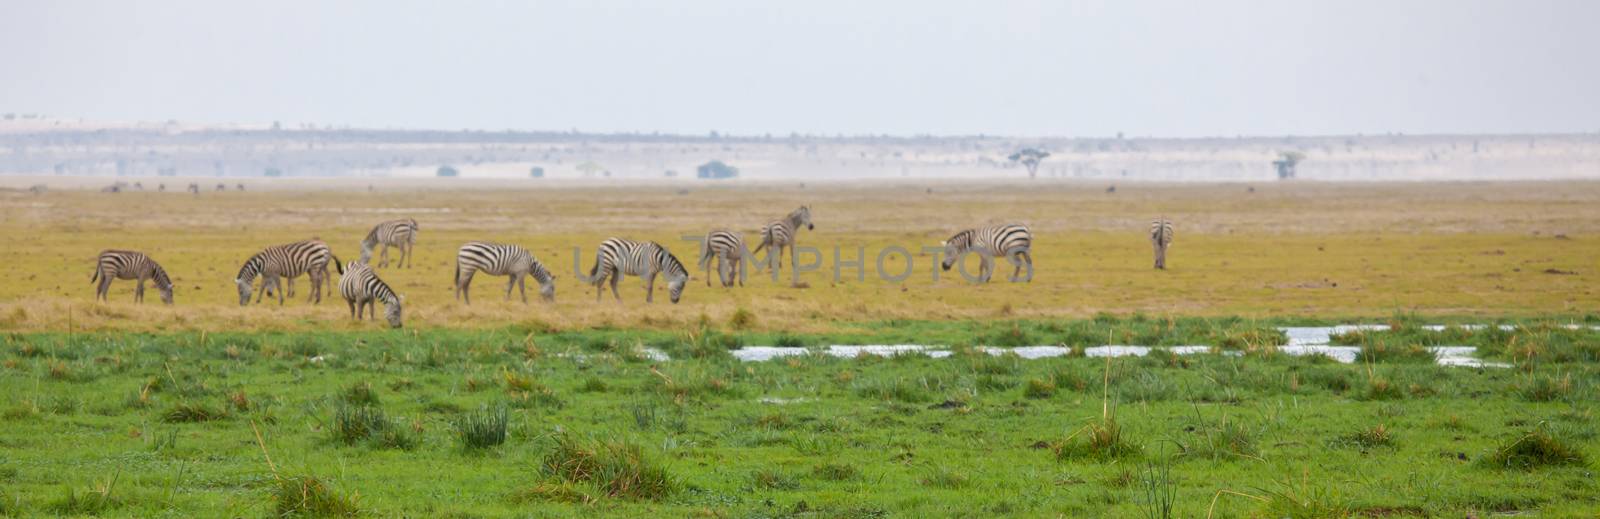 Landscape of Kenya with herds of animal by 25ehaag6